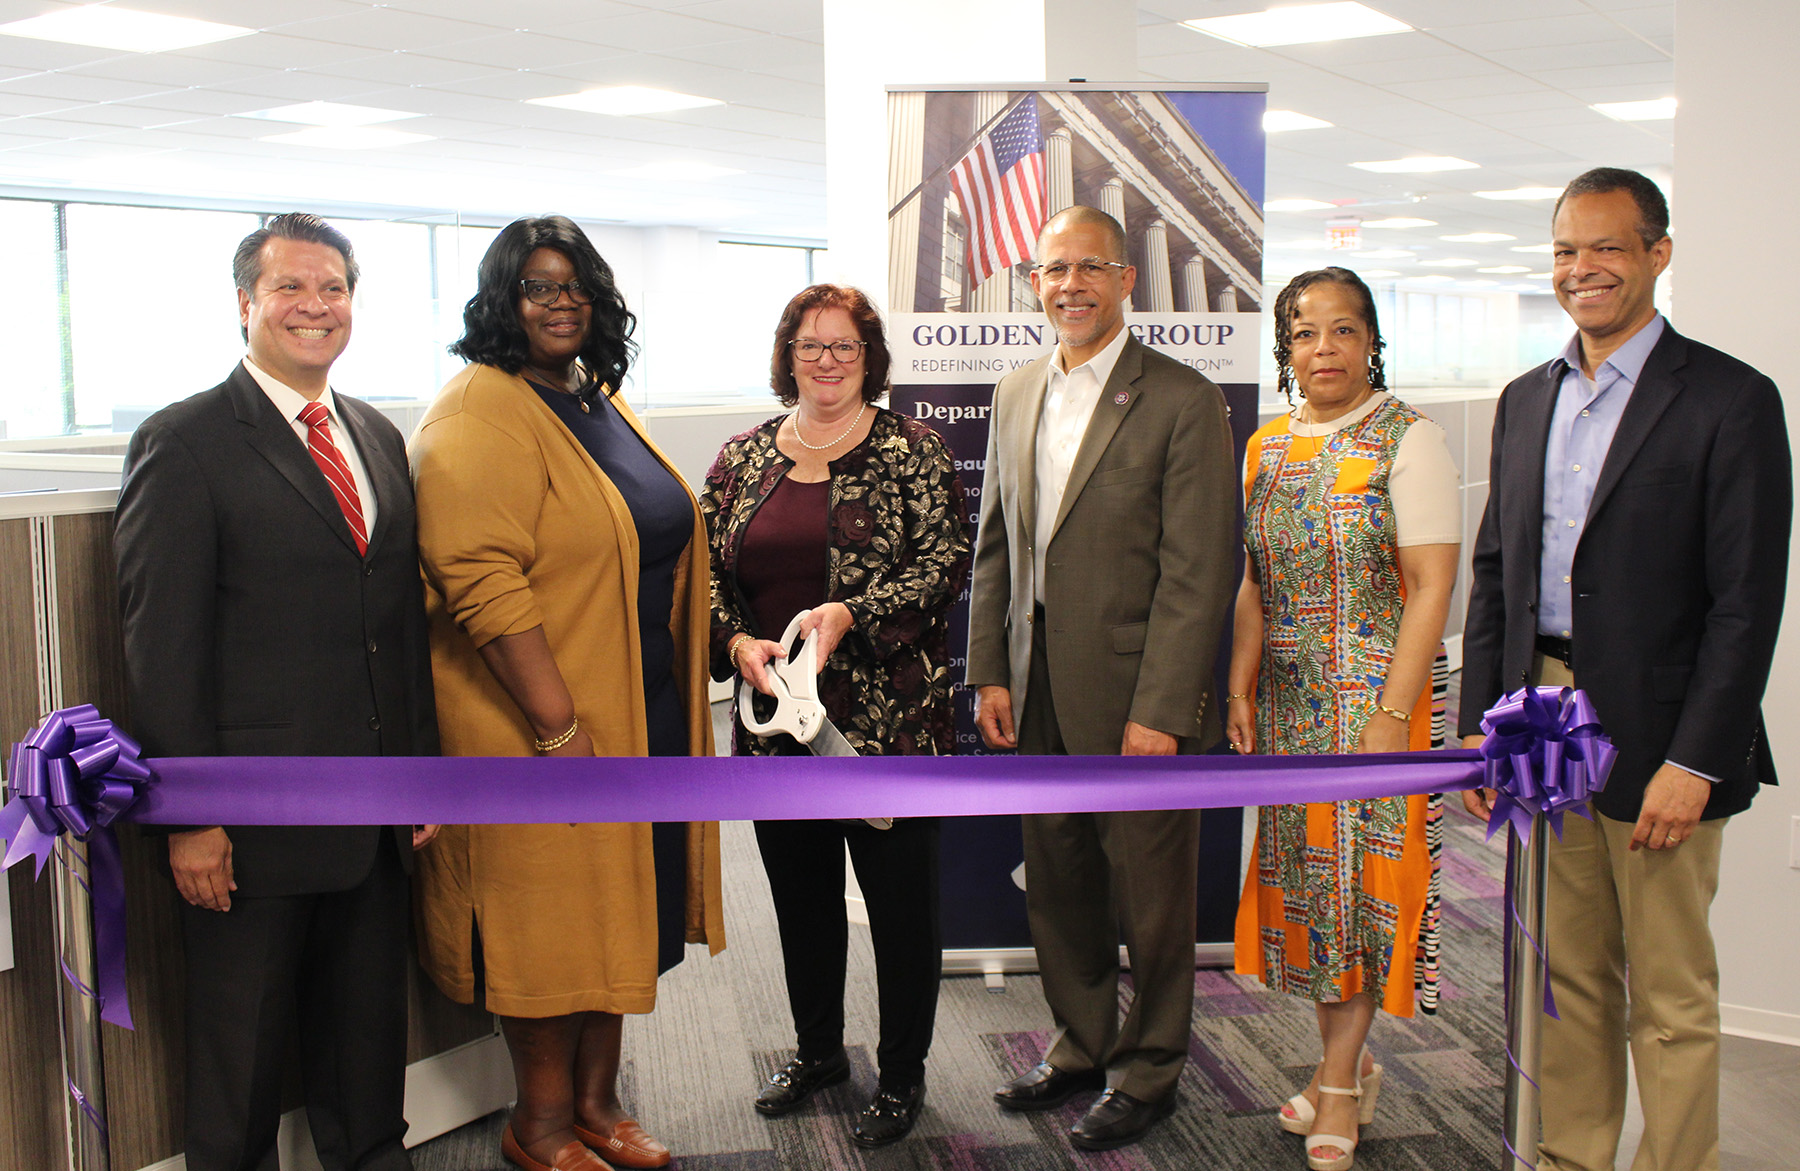 Six professionals at a ribbon-cutting ceremony for the Golden Key Group.